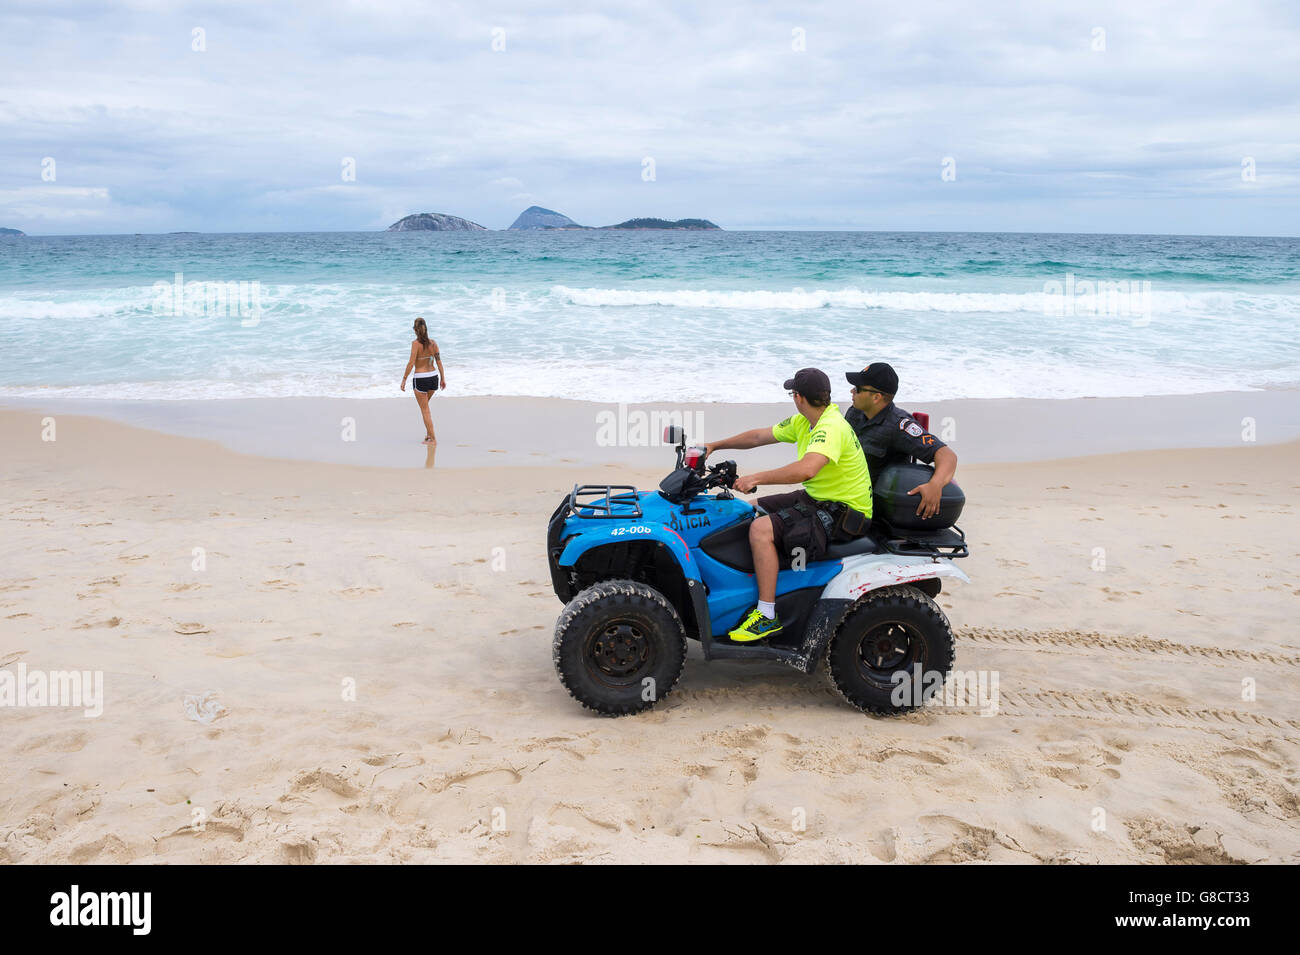 RIO DE JANEIRO - MARCH 15, 2016: Police on quad bike patrol Ipanema Beach as the city tries to improve security for the Olympics Stock Photo